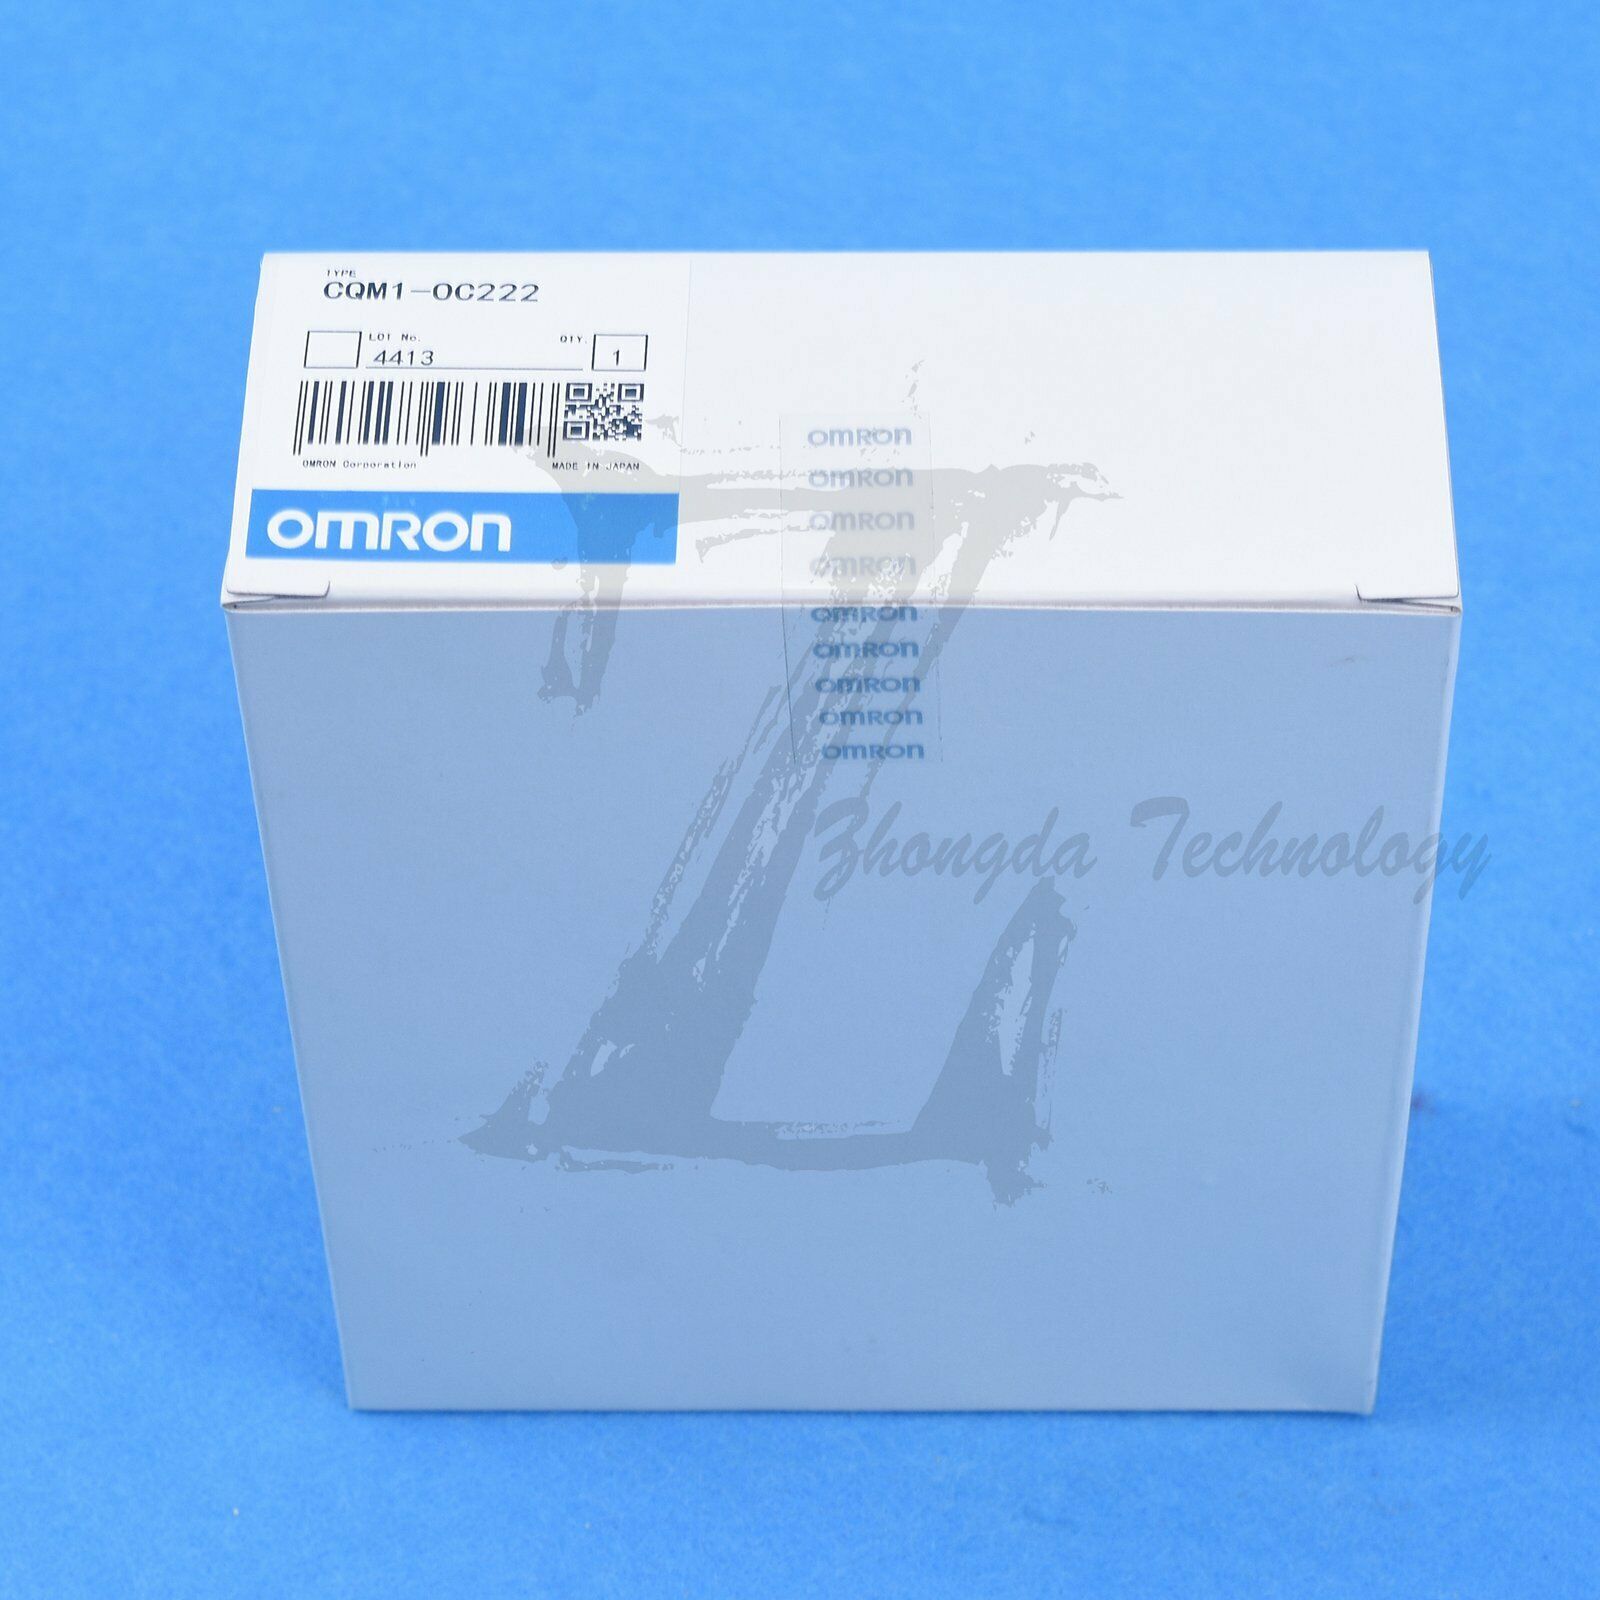 1pc new Omron CQM1-OC222 PLC module free shipping KOEED 101-200, 80%, import_2020_10_10_031751, Omron, Other